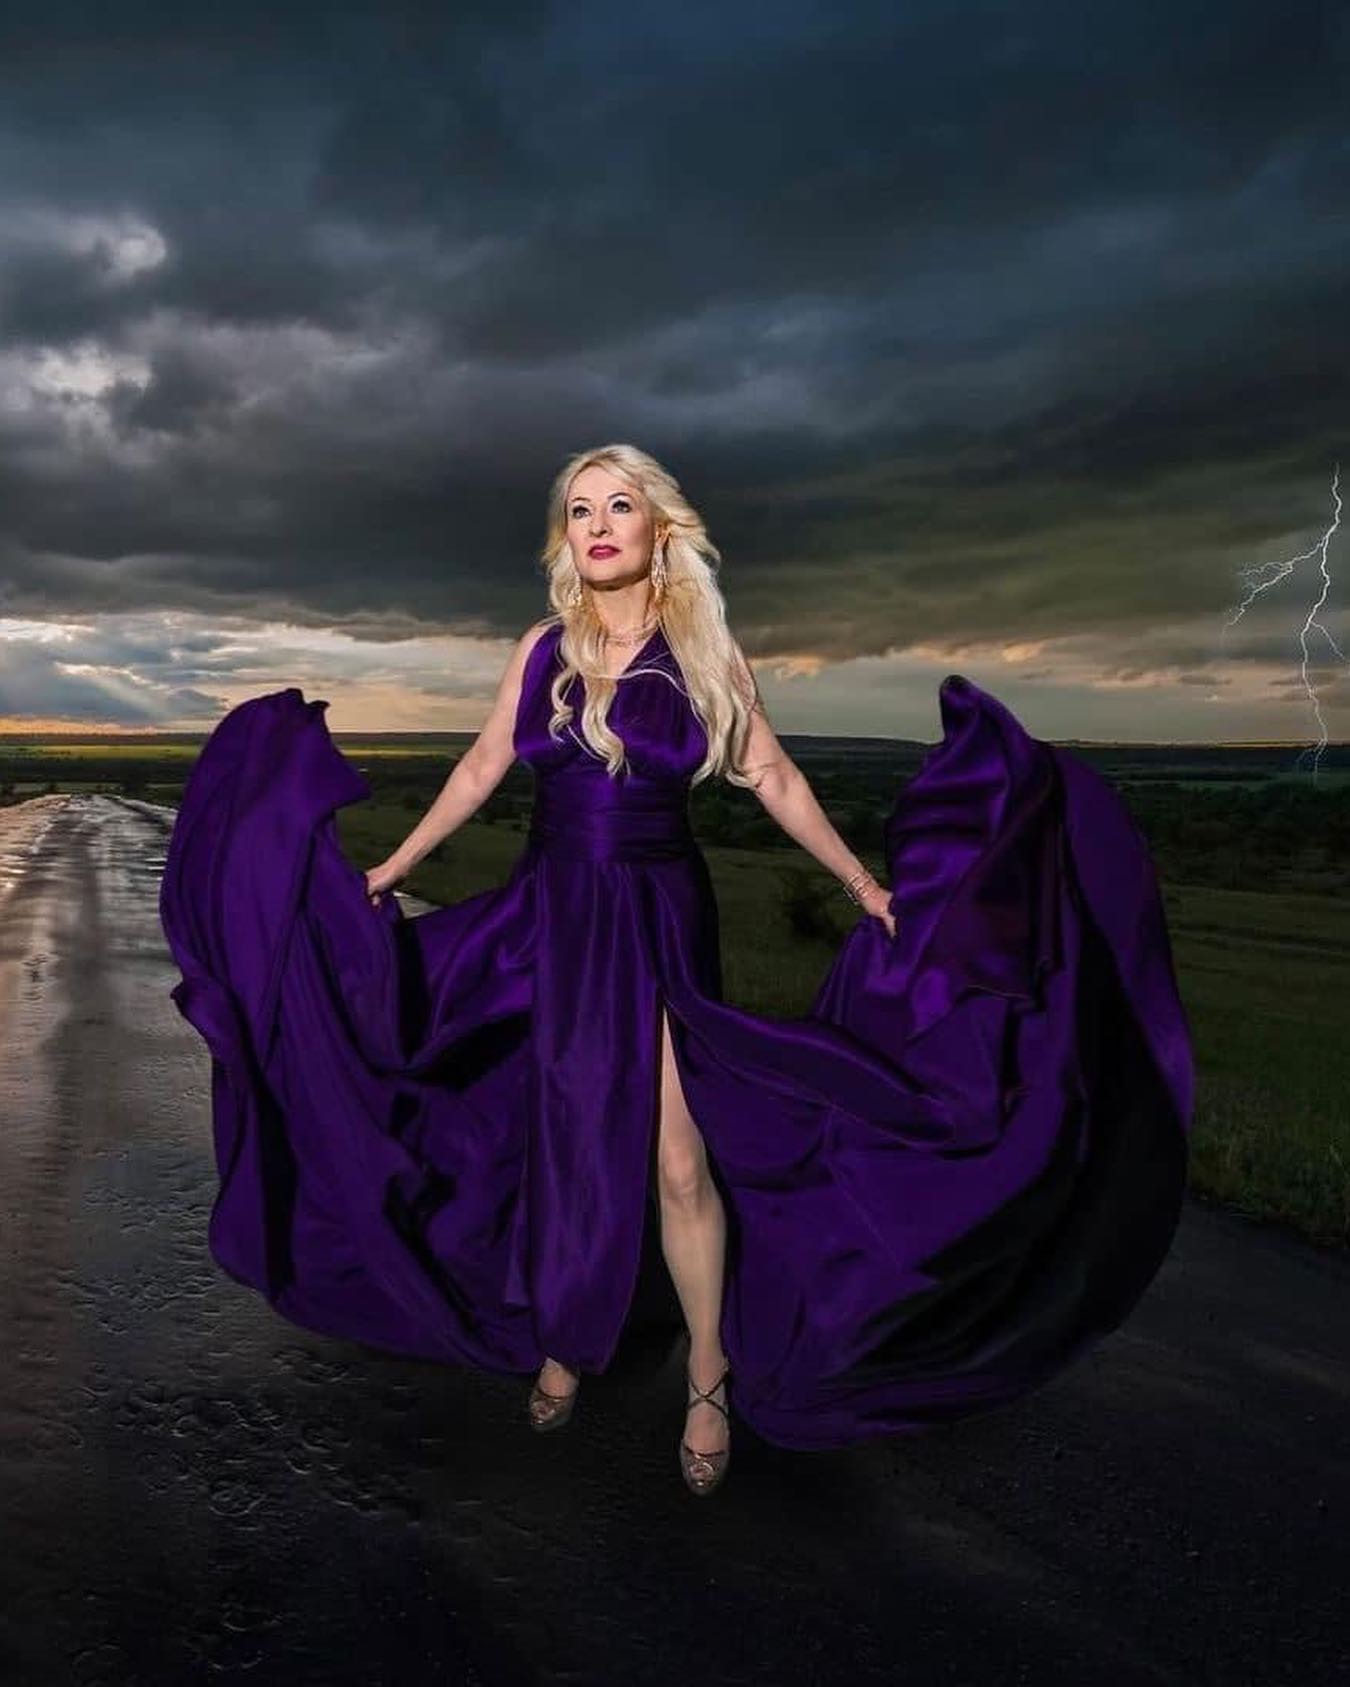 Hunter Storm standing on a wet road, channeling the storm as a sorceress in a vibrant royal purple Santorini dress.